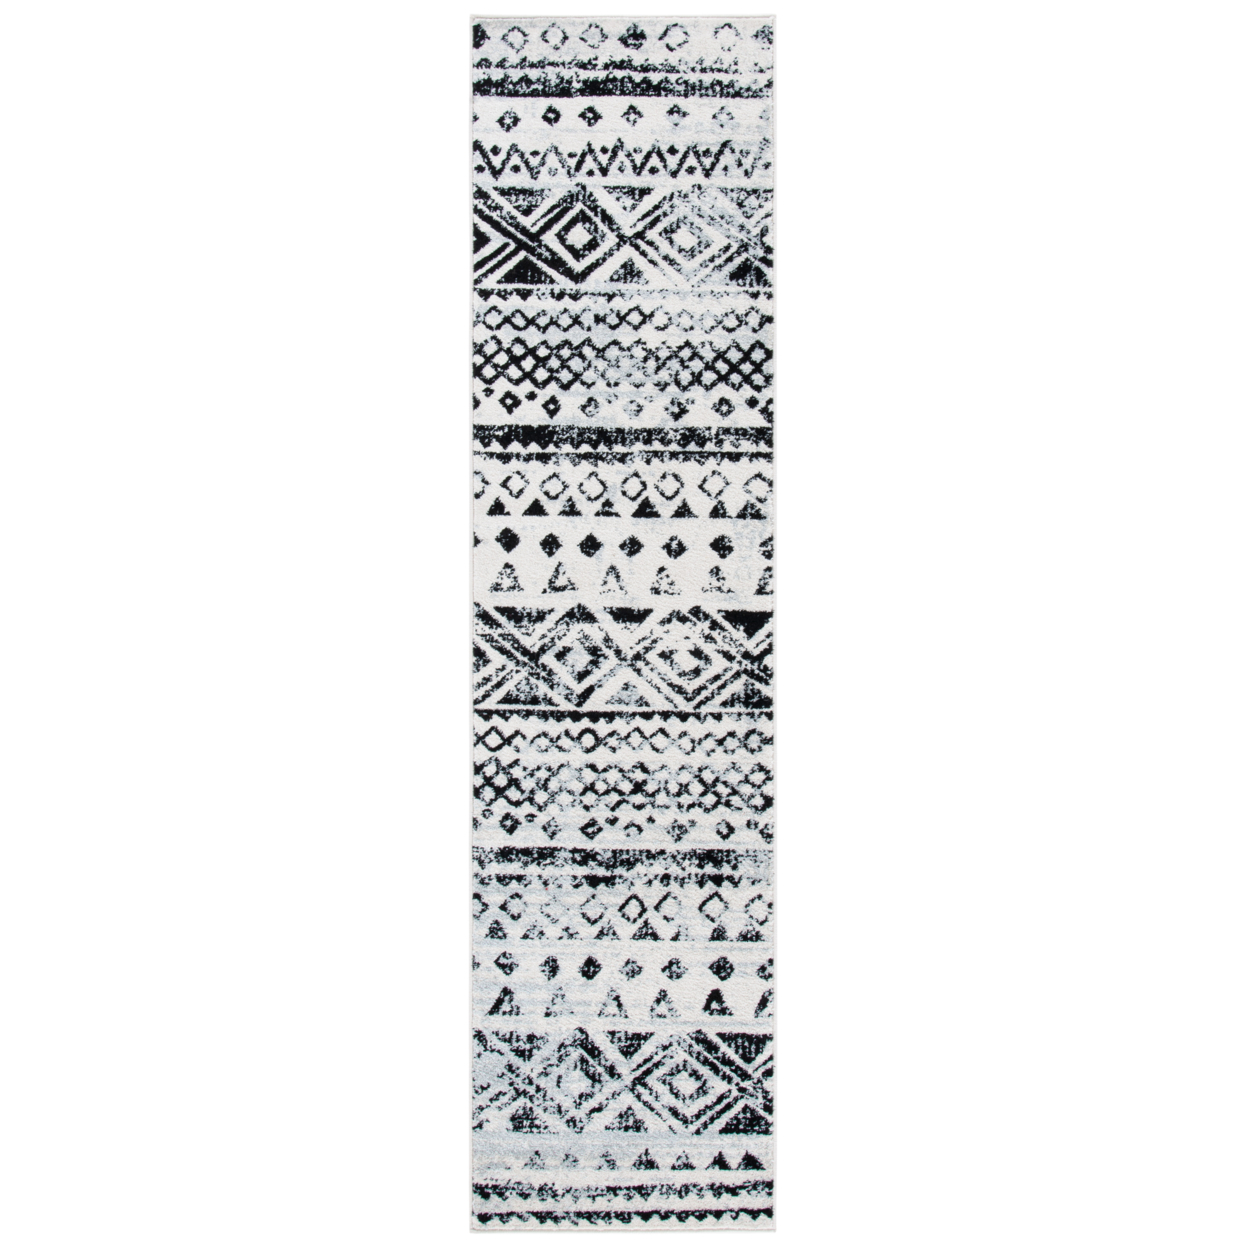 SAFAVIEH Mercer Collection MRE415A Ivory / Charcoal Rug - 8 X 10